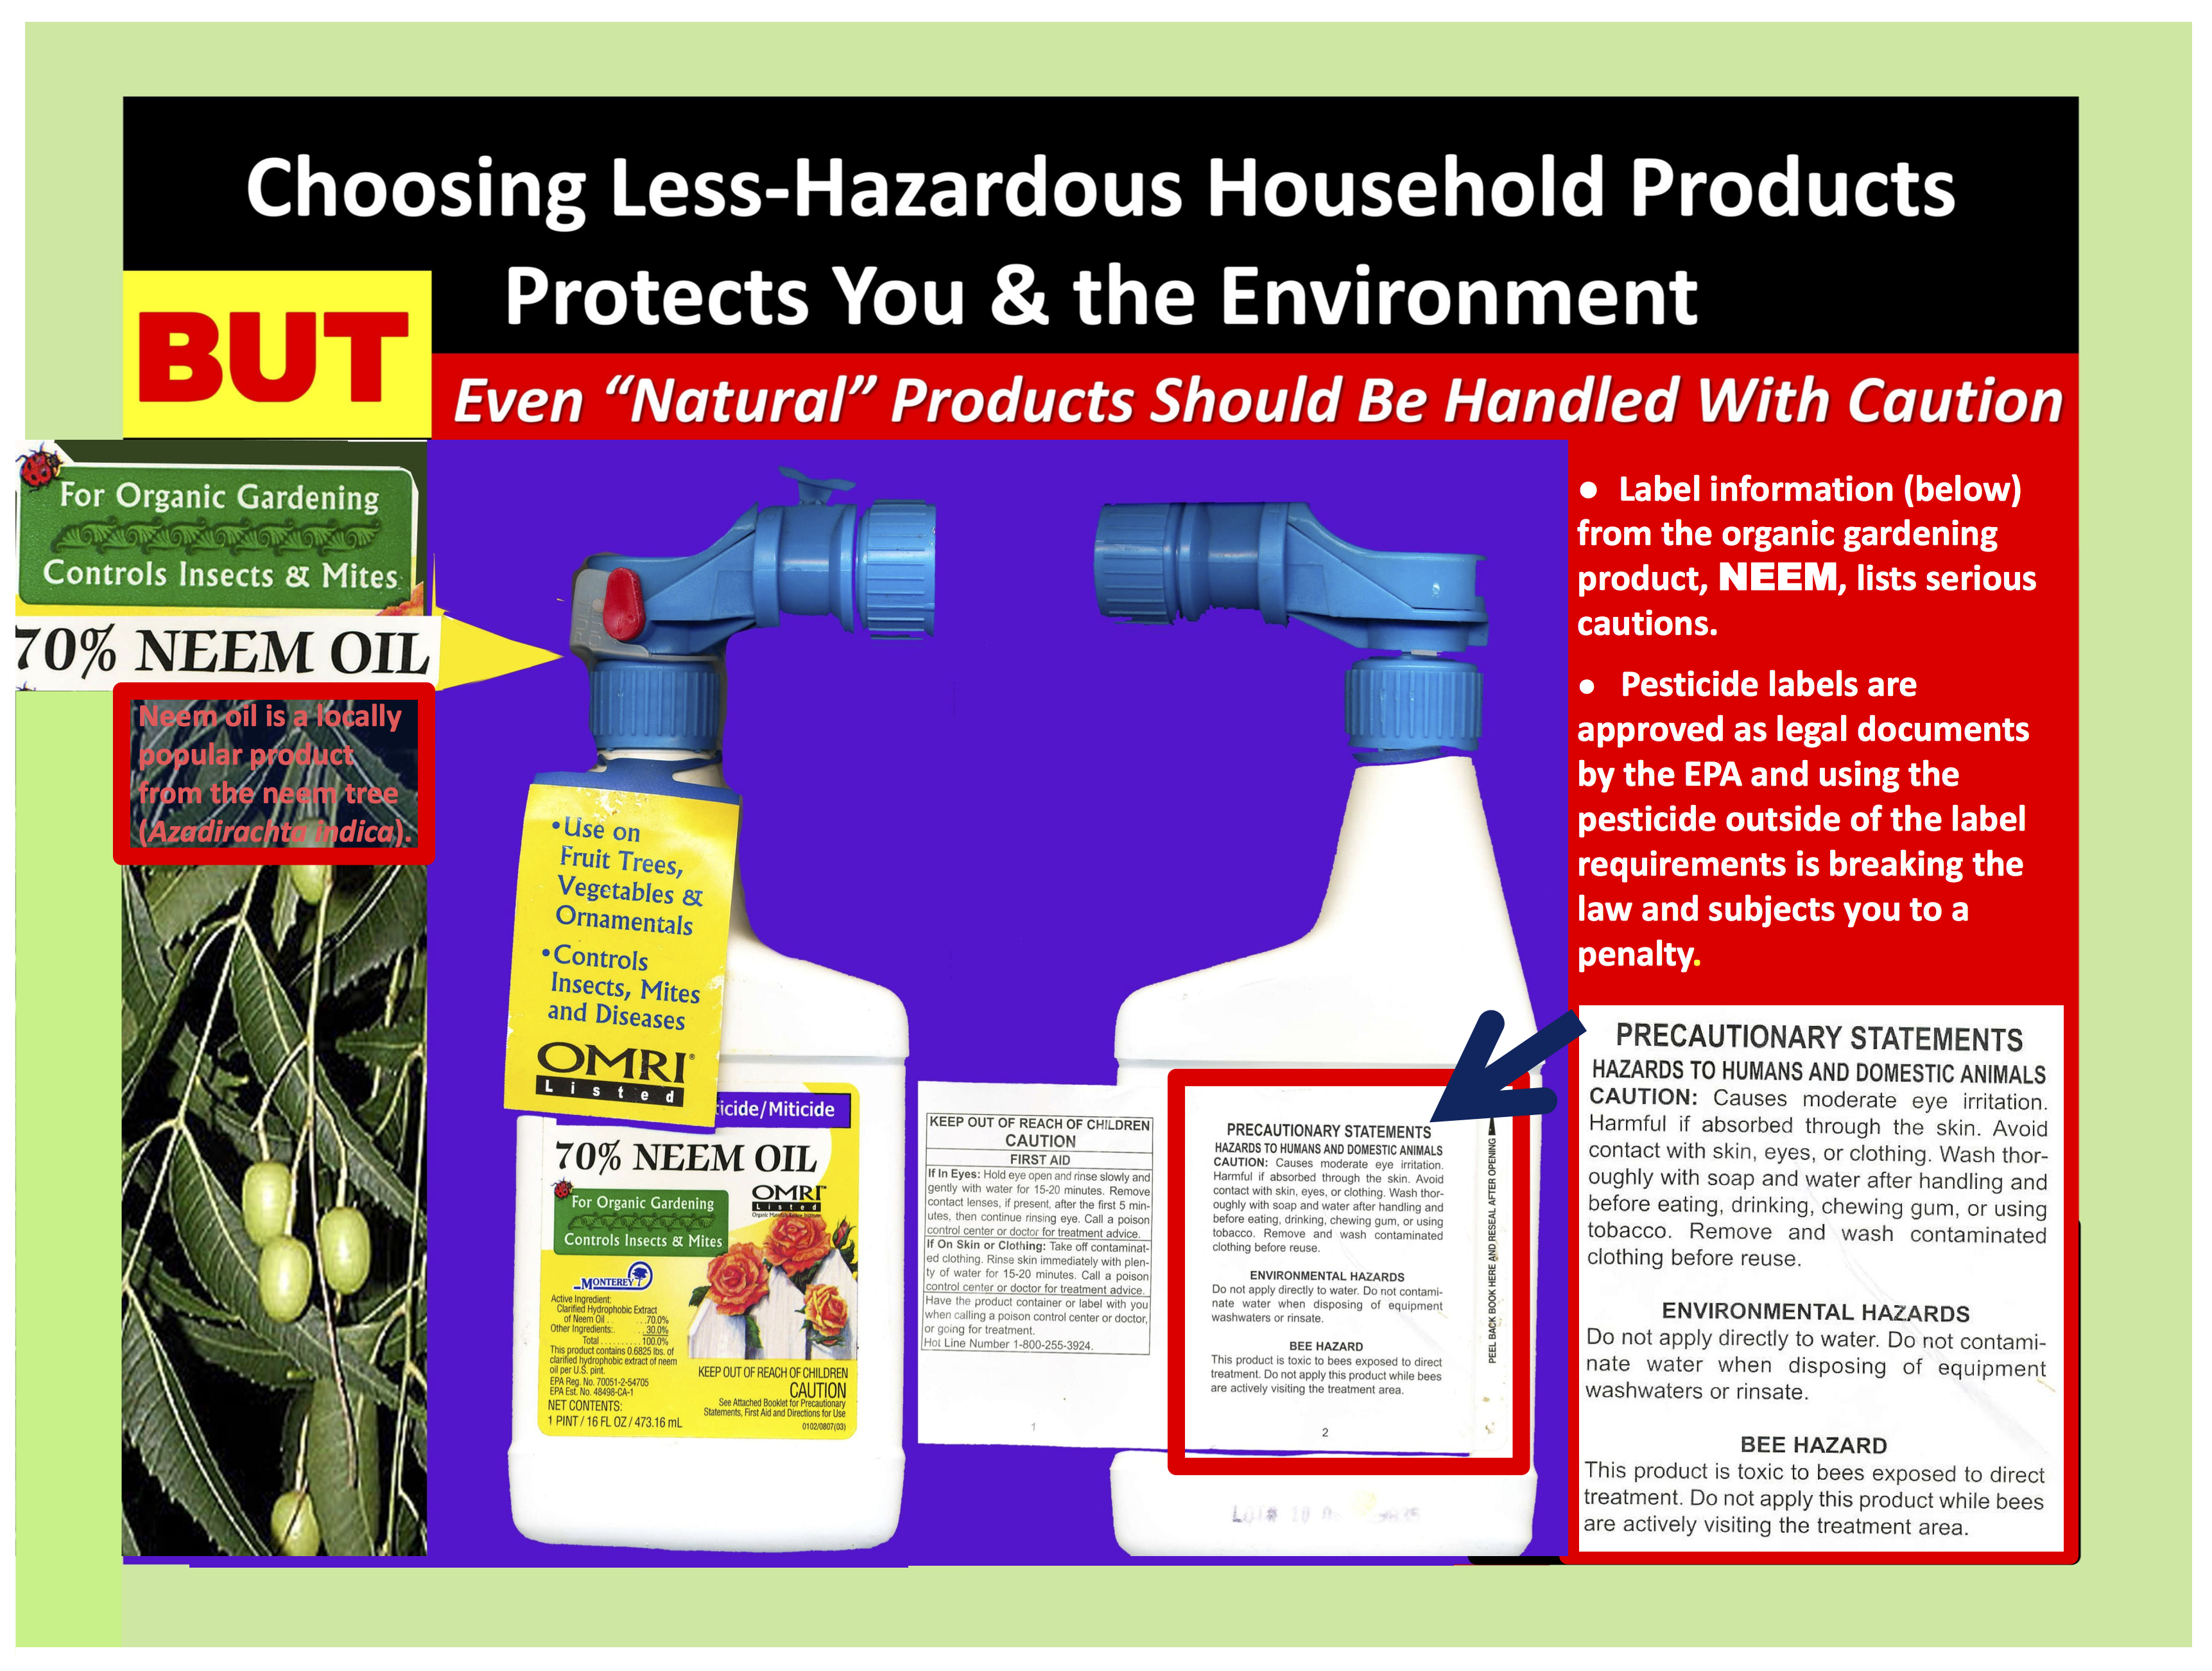 A Cooperative Extension Service poster on household toxins.